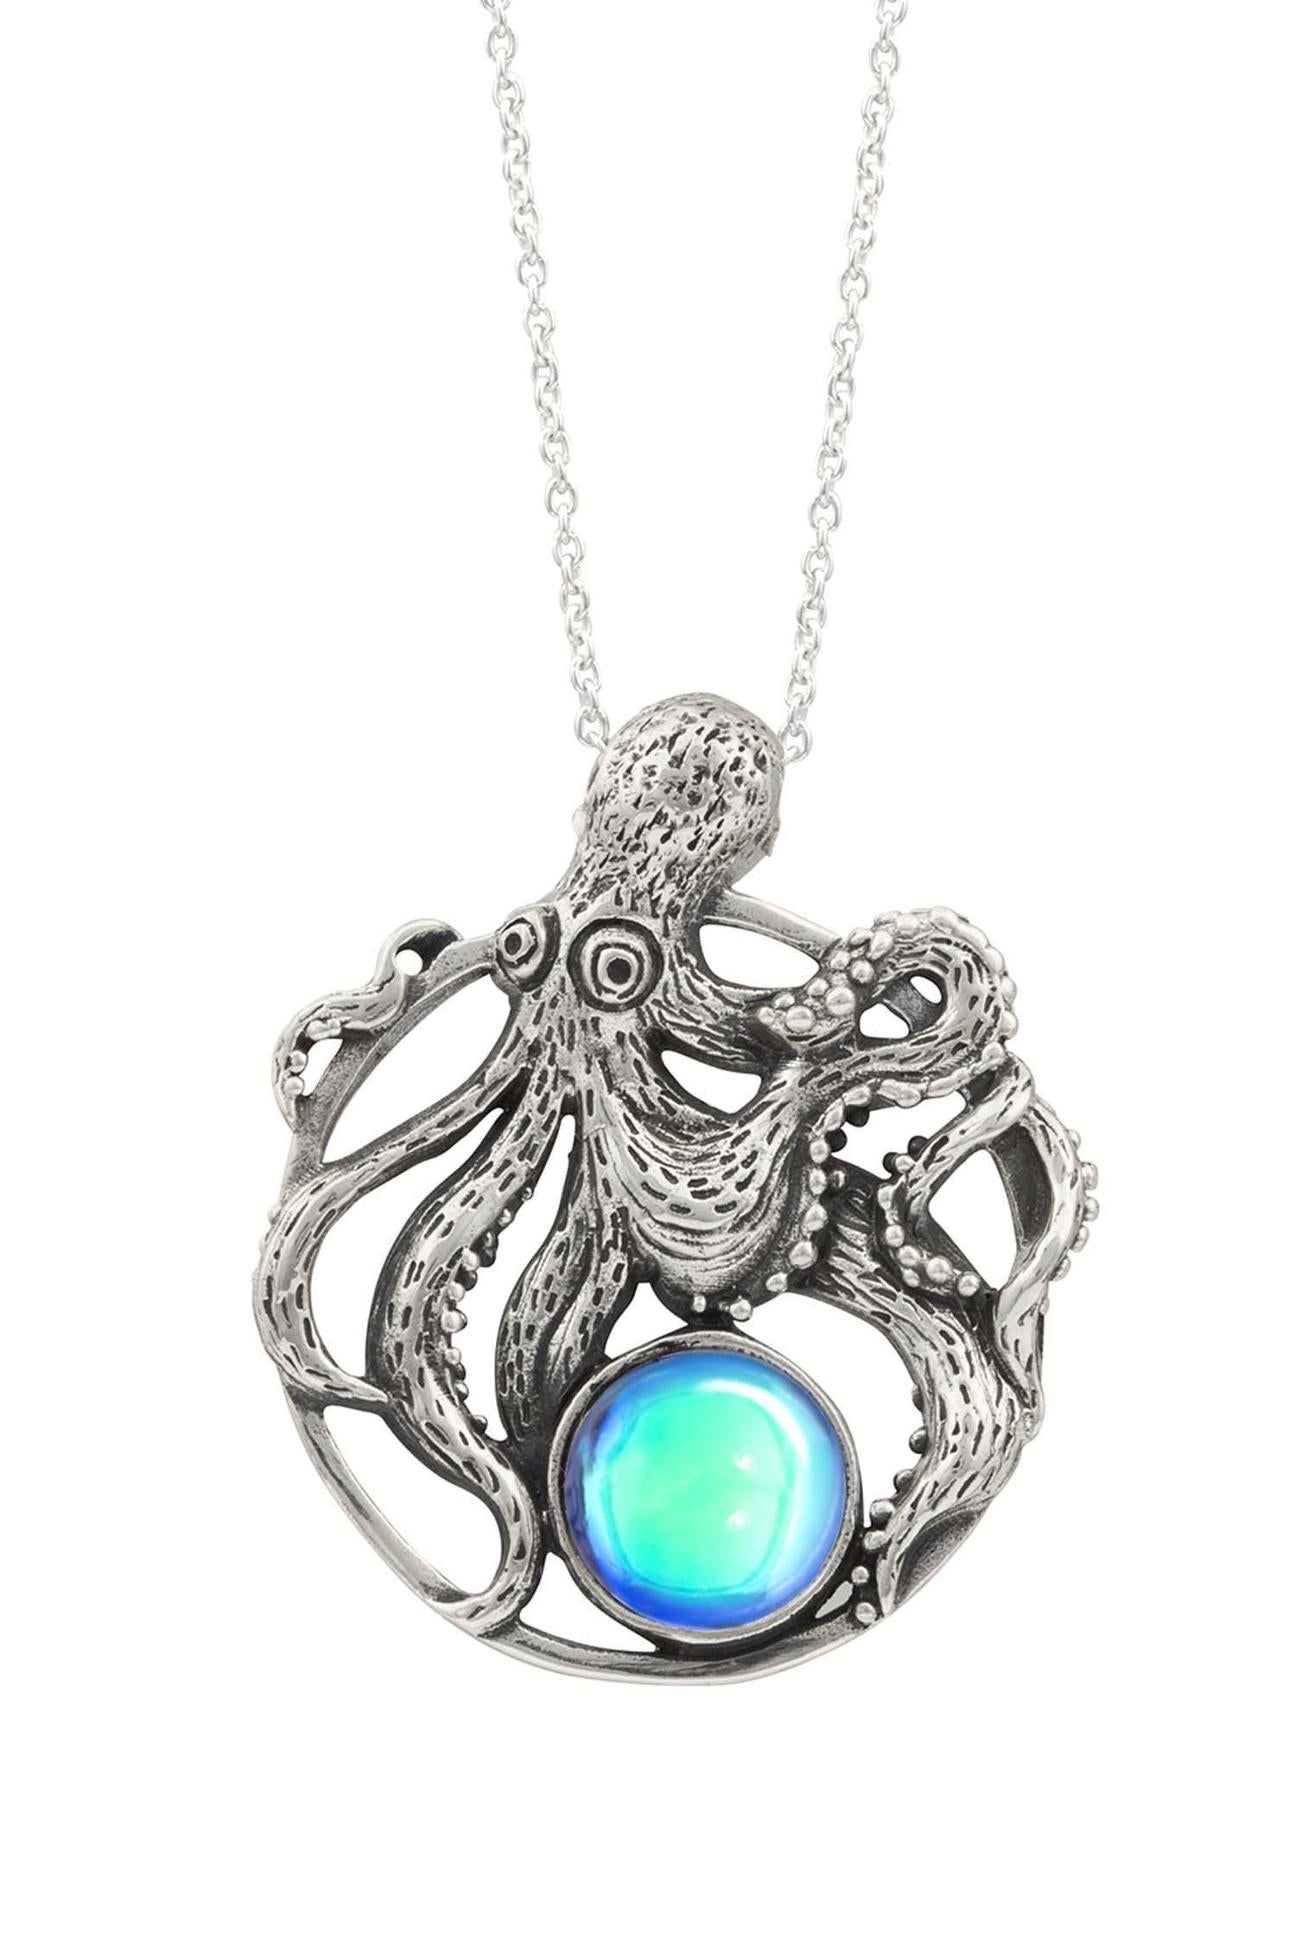 LeightWorks Crystal Octopus Pendant